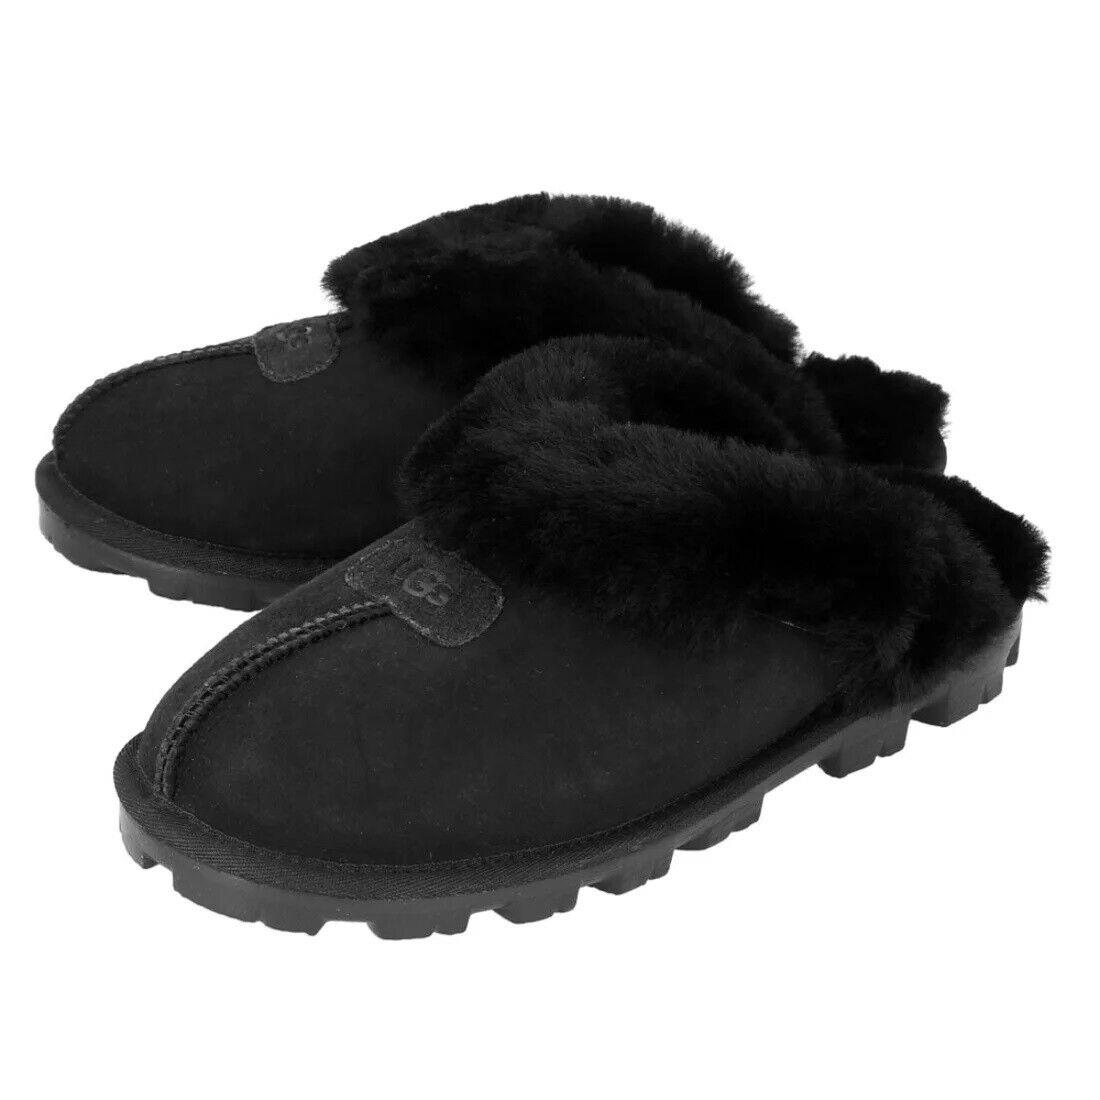 Women`s Shoes Ugg Brand 5125 Classic Comfy Coquette Slippers Black